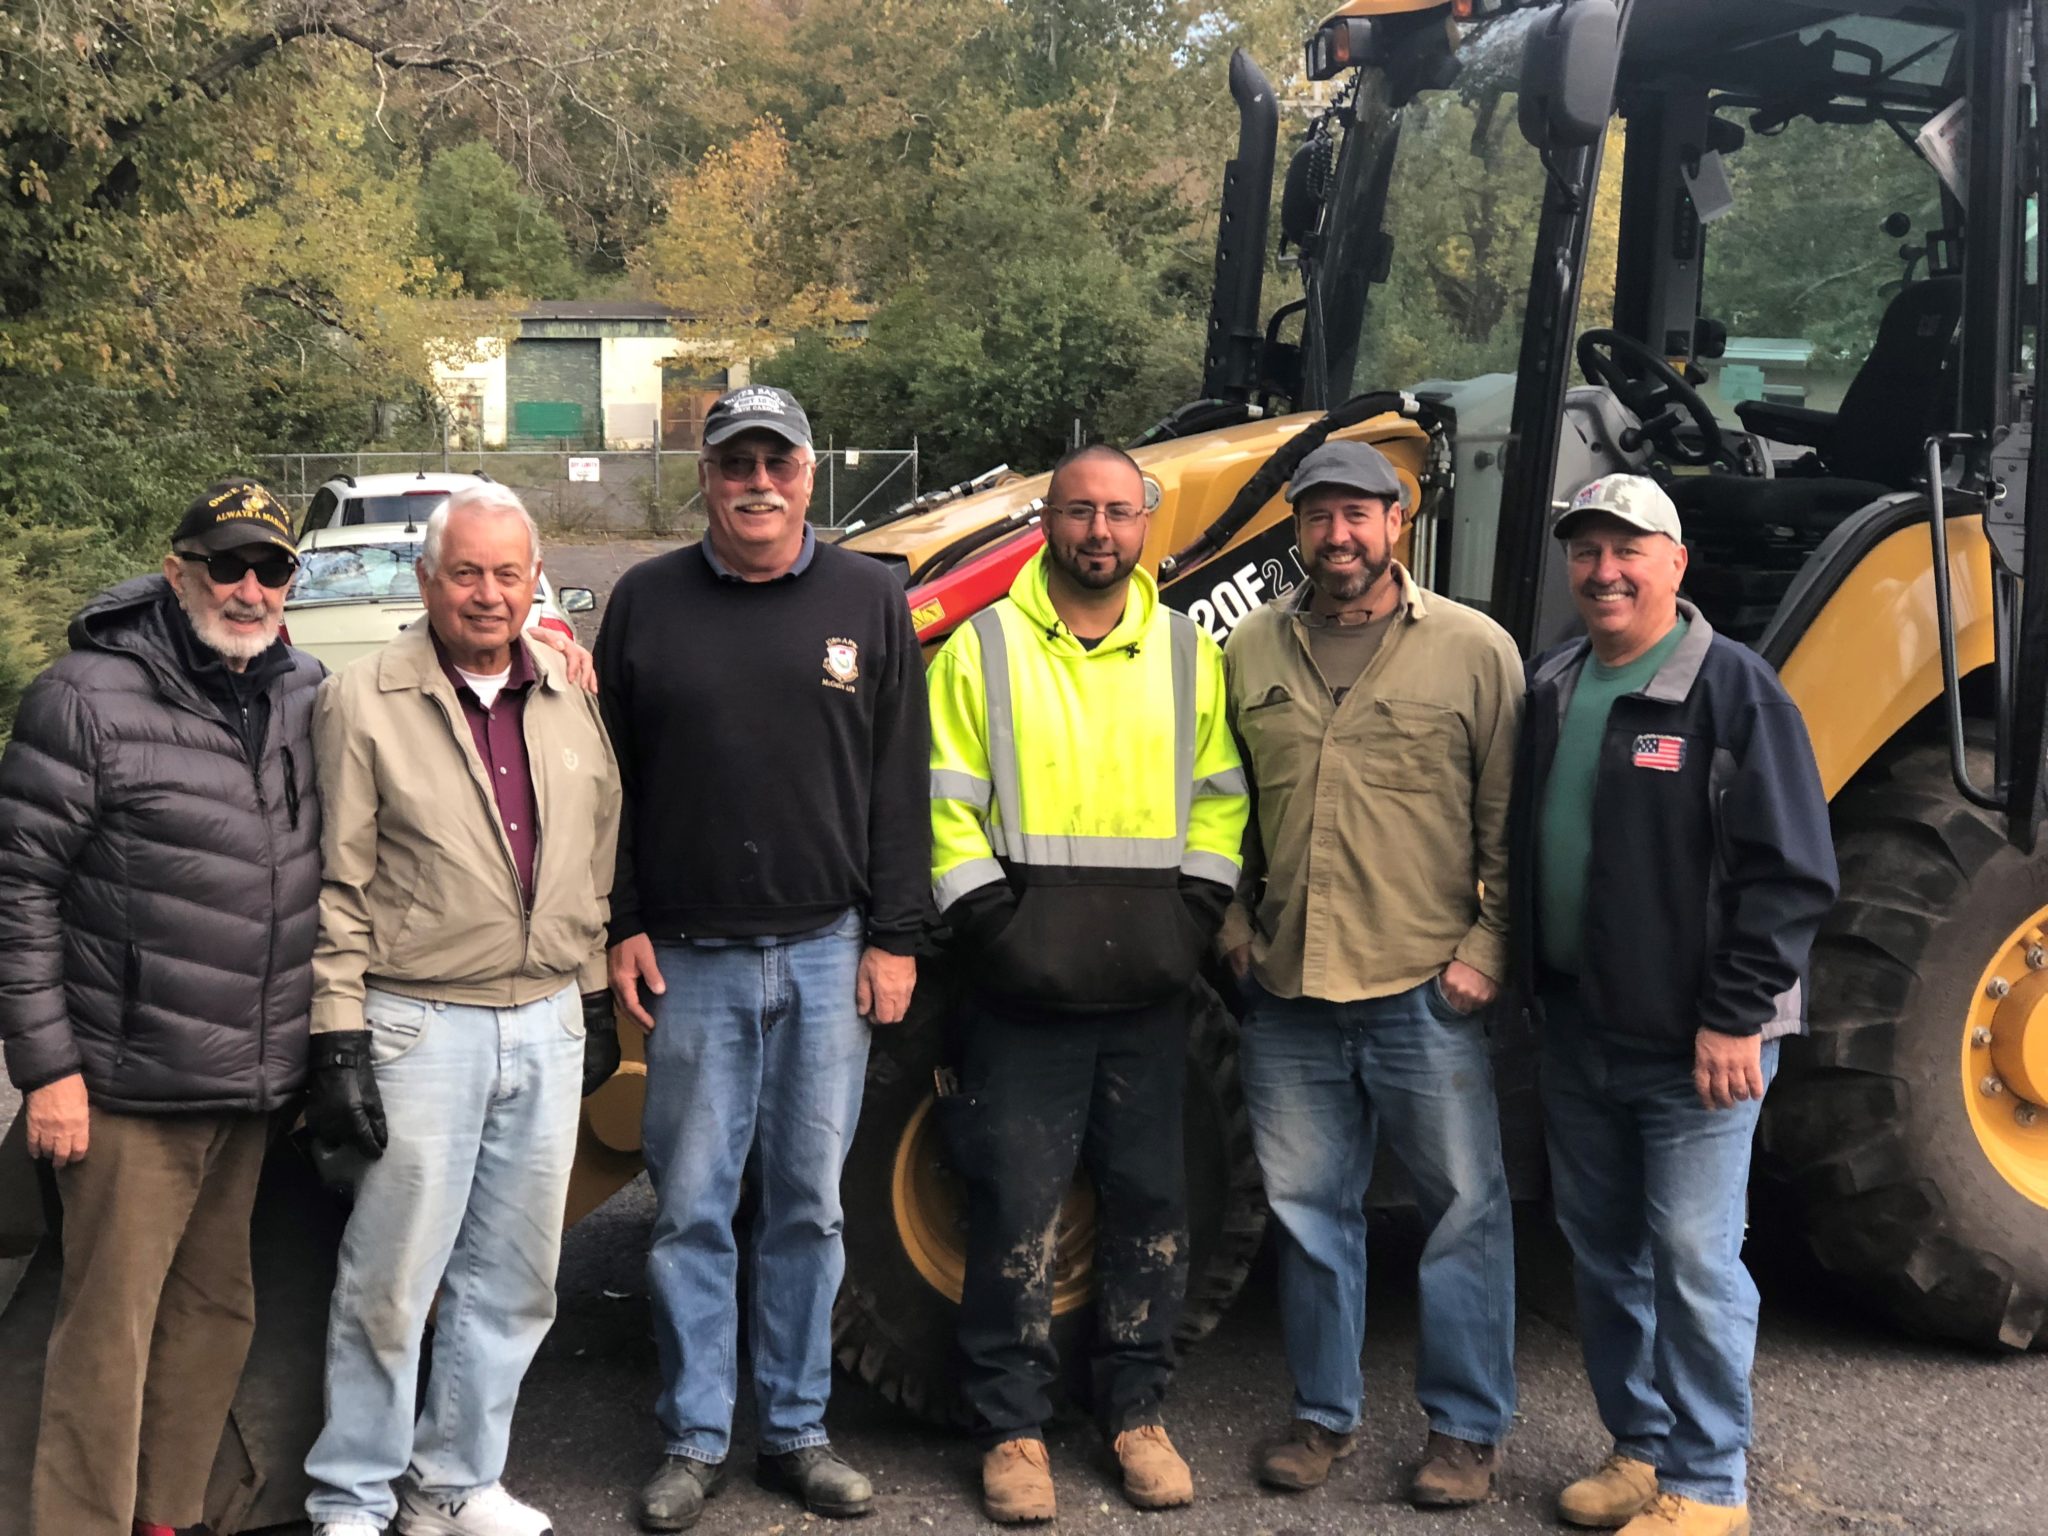 Suez lends bulldozer and volunteers to help clear property for Rockland Homes for Heroes construction